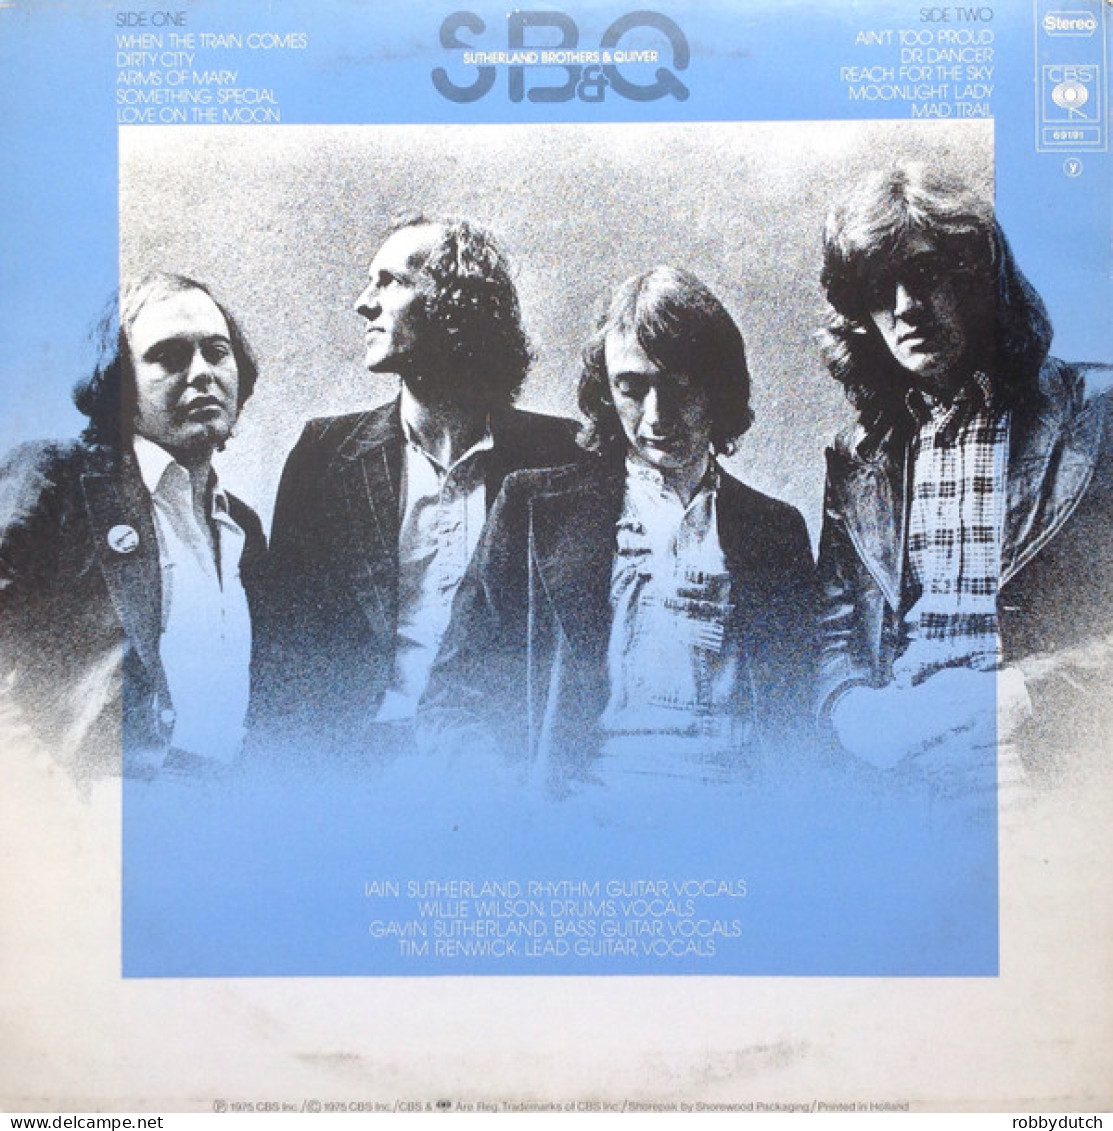 * LP *  SUTHERLAND BROTHERS & QUIVER - REACH FOR THE SKY (Europe 1975 EX-) - Country Et Folk